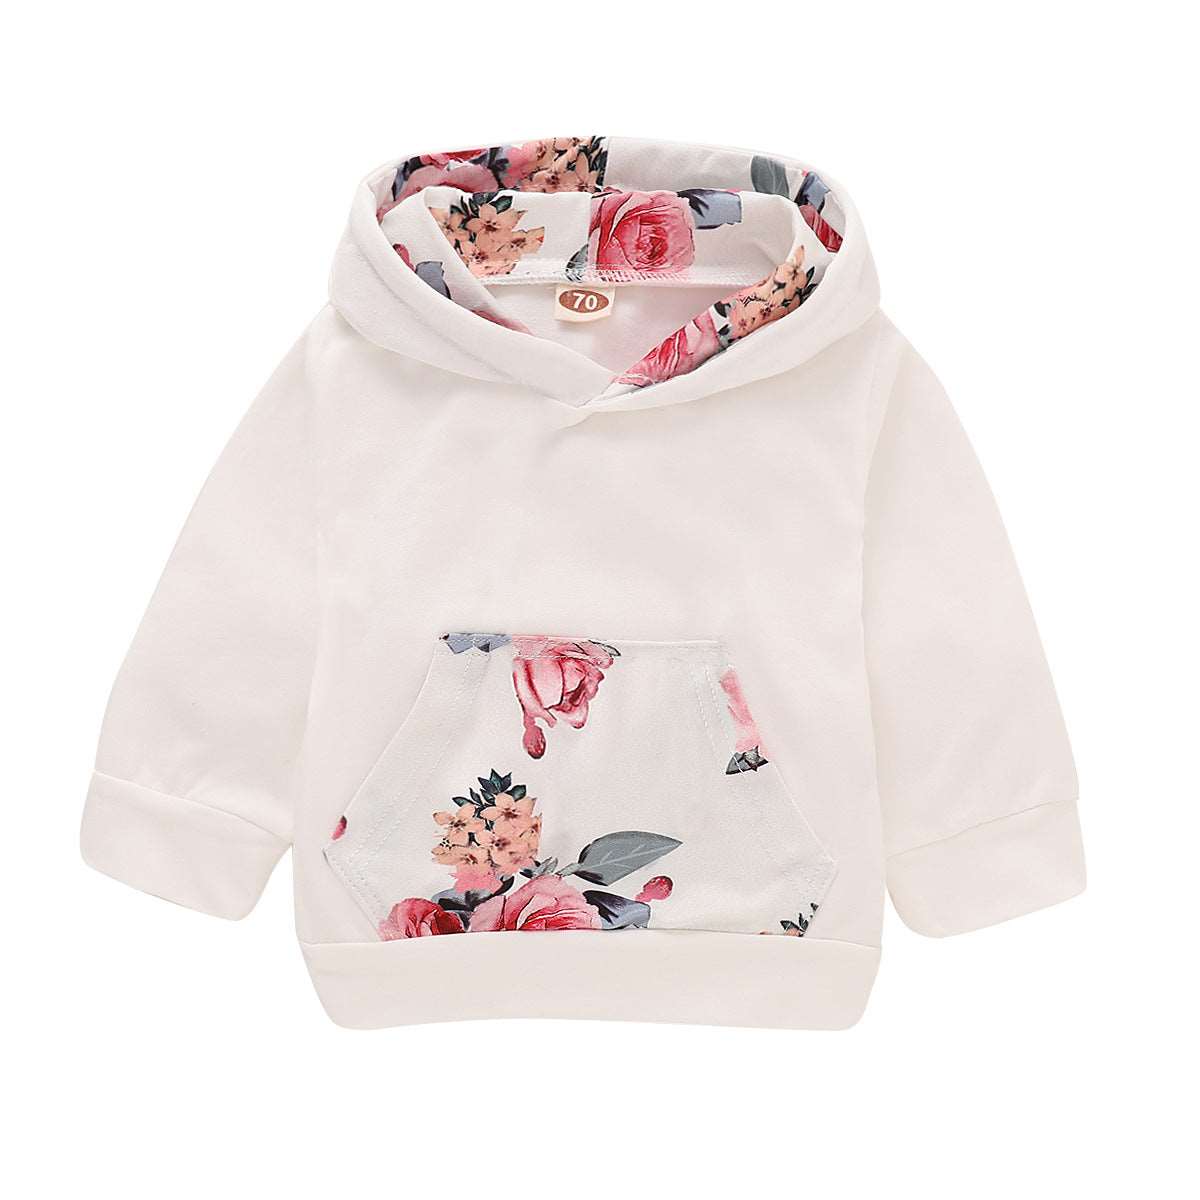 Baby Girl Hooded Print Outfit - Sizes Newborn to 12 Months